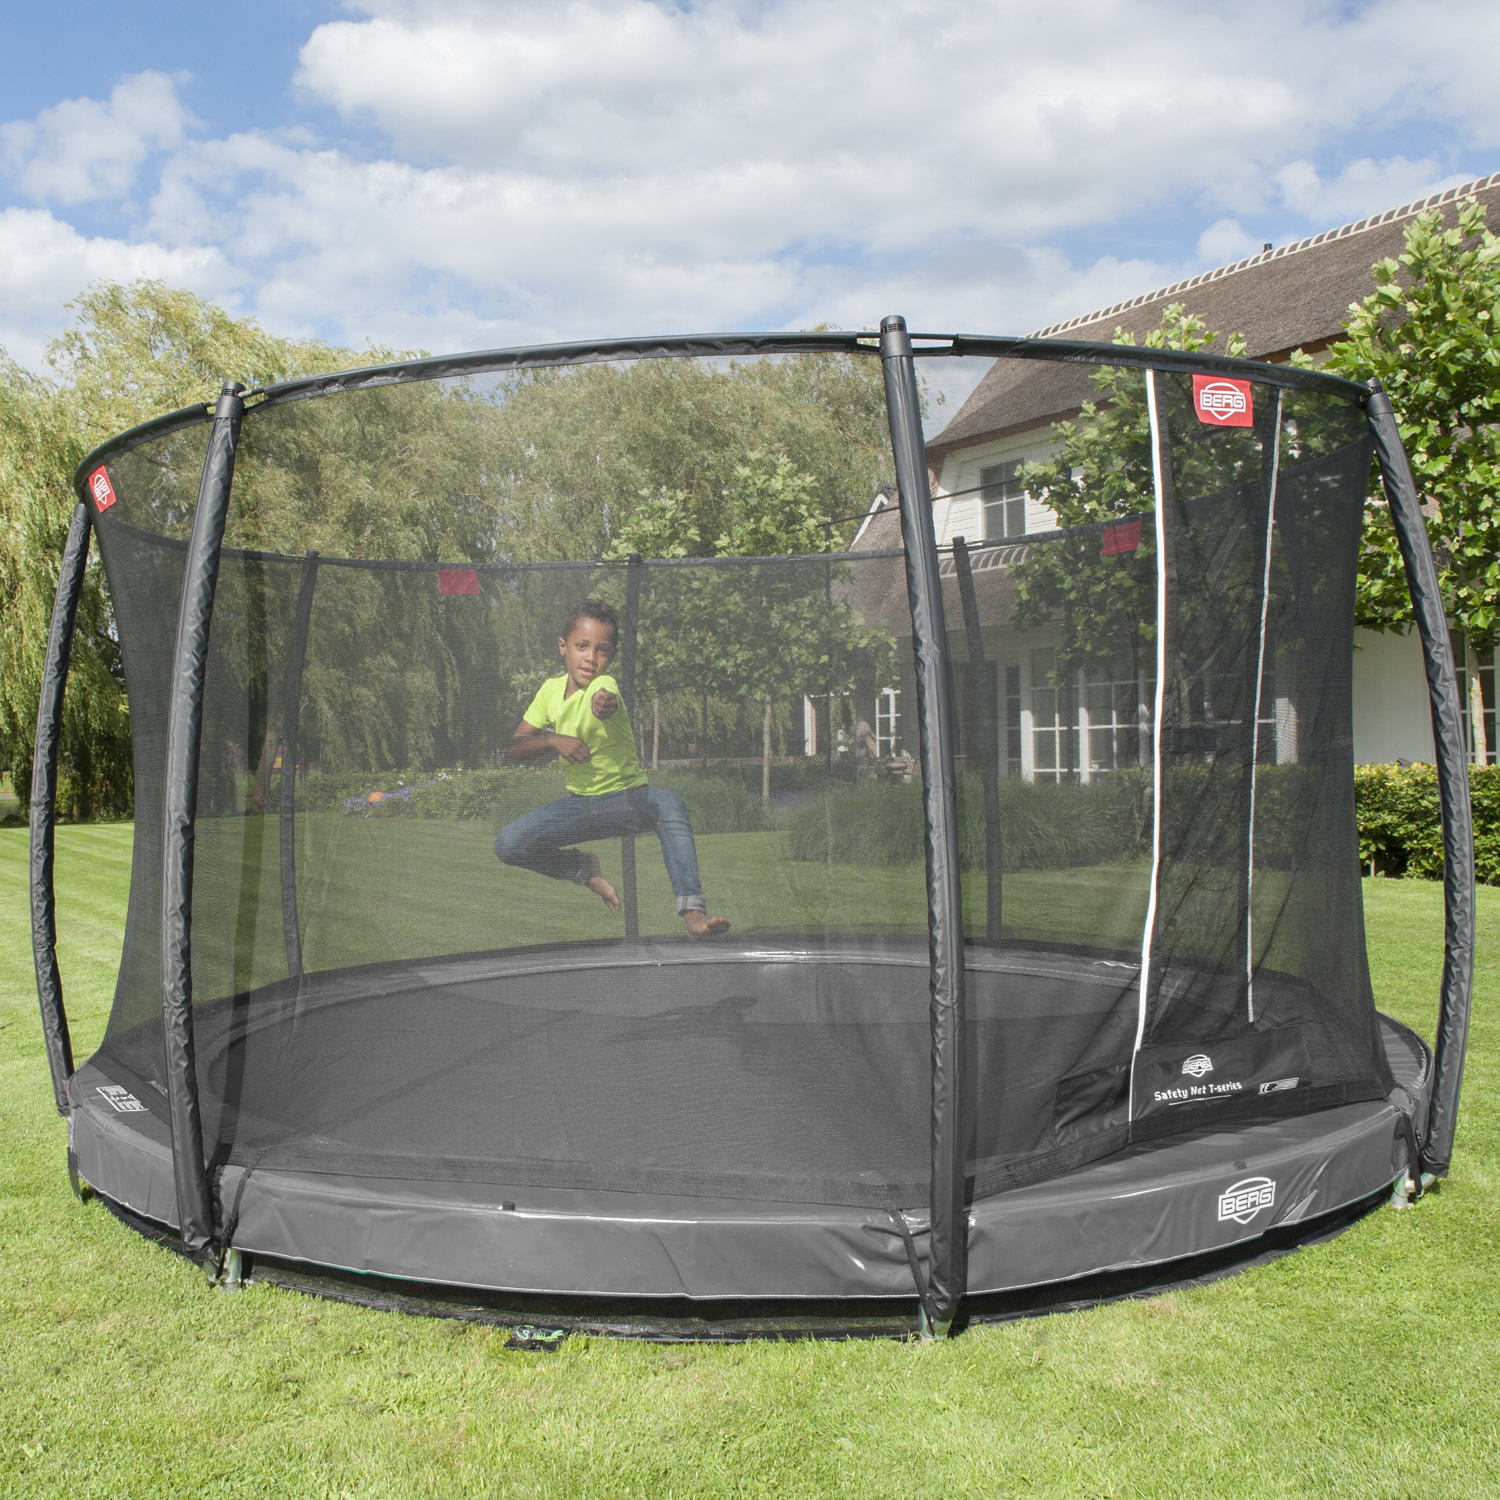 Berg Elite 430 Grey incl. Safety Net Deluxe - Best choice